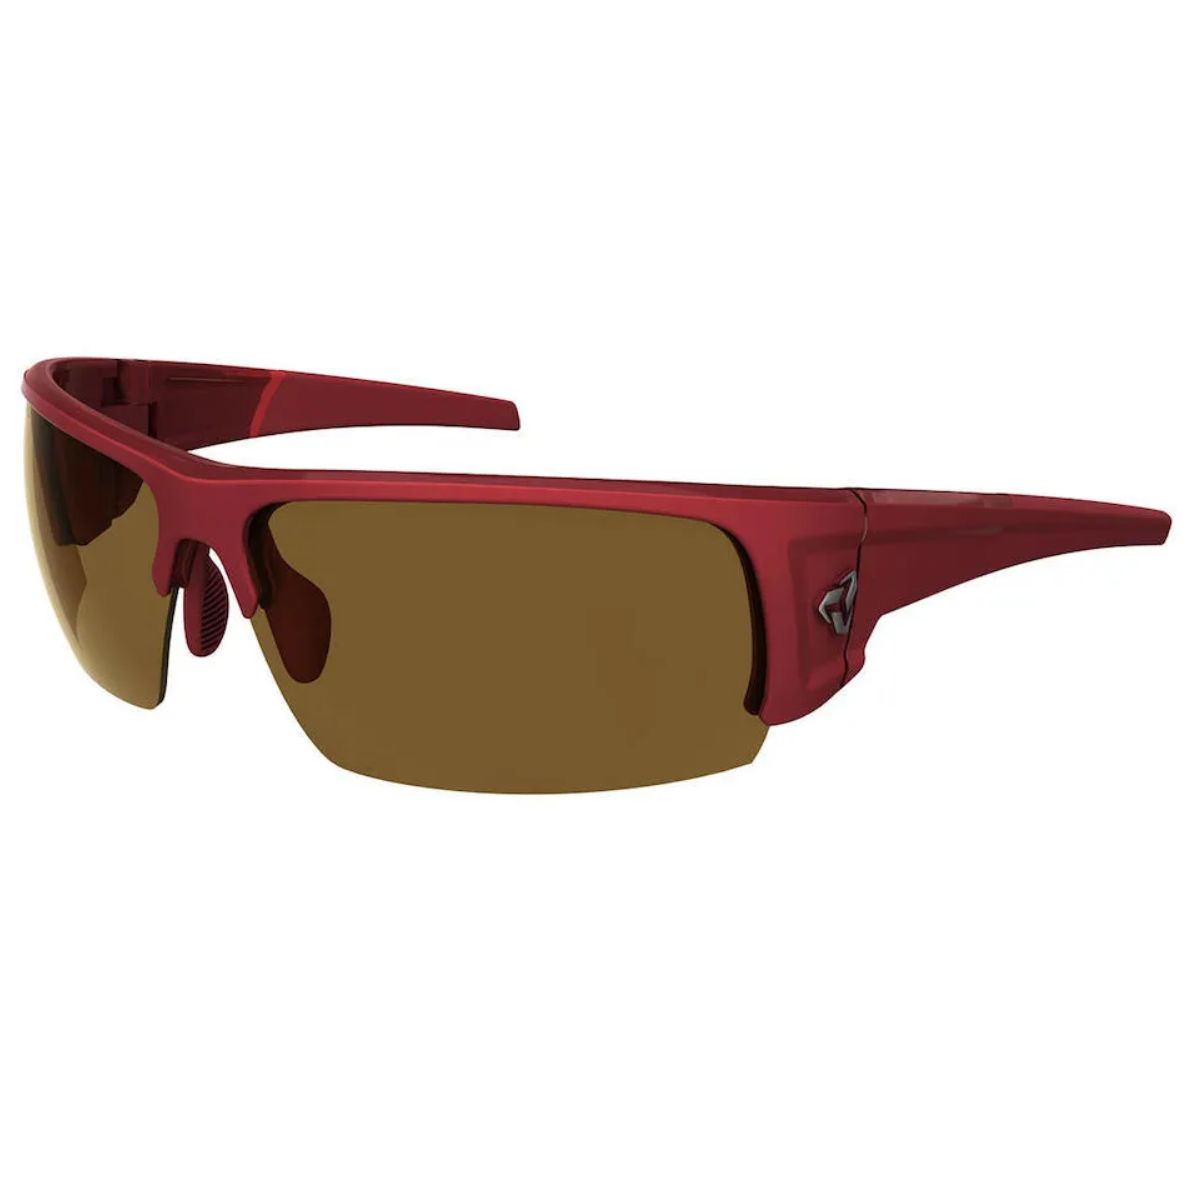 Ryders Caliber Sunglasses Red - Brown Lens